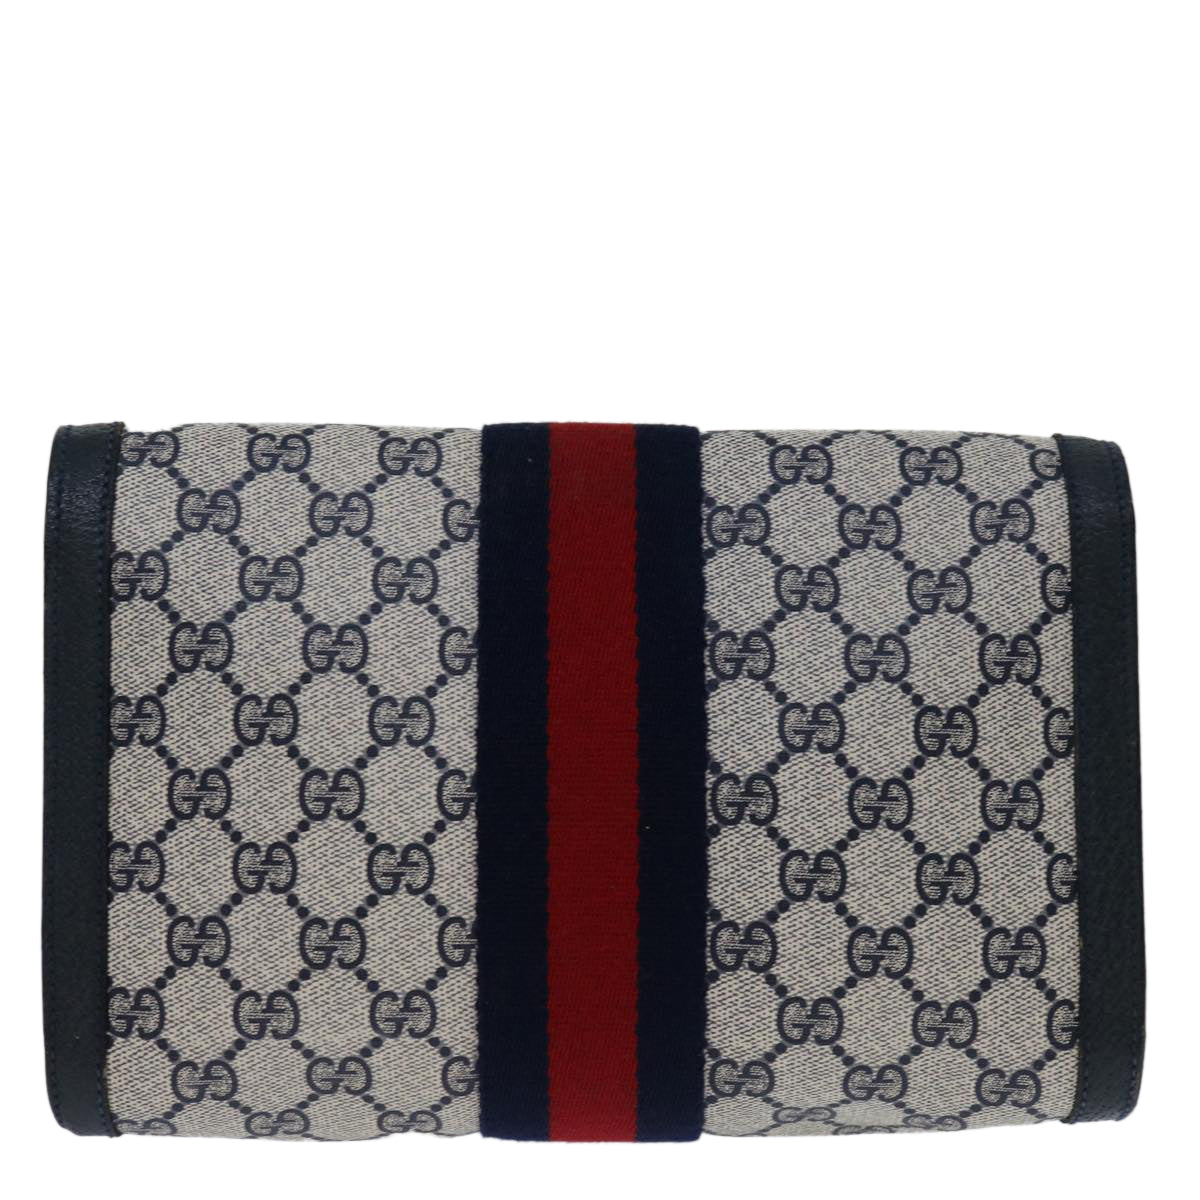 GUCCI GG Supreme Sherry Line Clutch Bag PVC Navy Red 89 01 006 Auth 68981